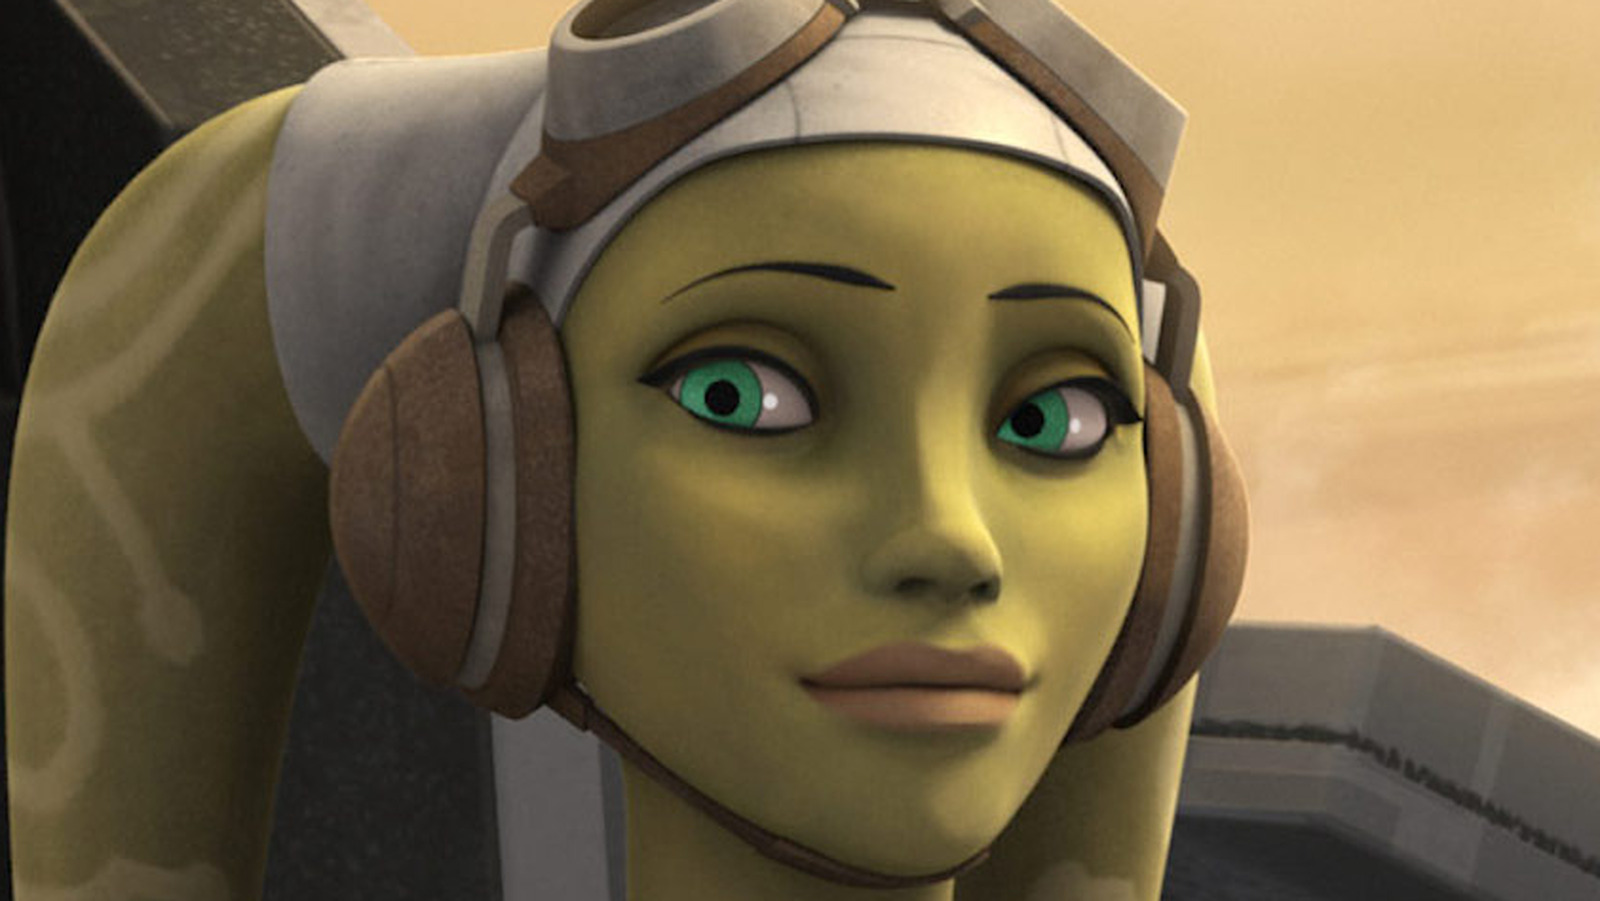 The One Thing Voice Actor Vanessa Marshall Would Change About Her Star Wars  Character Hera - Exclusive